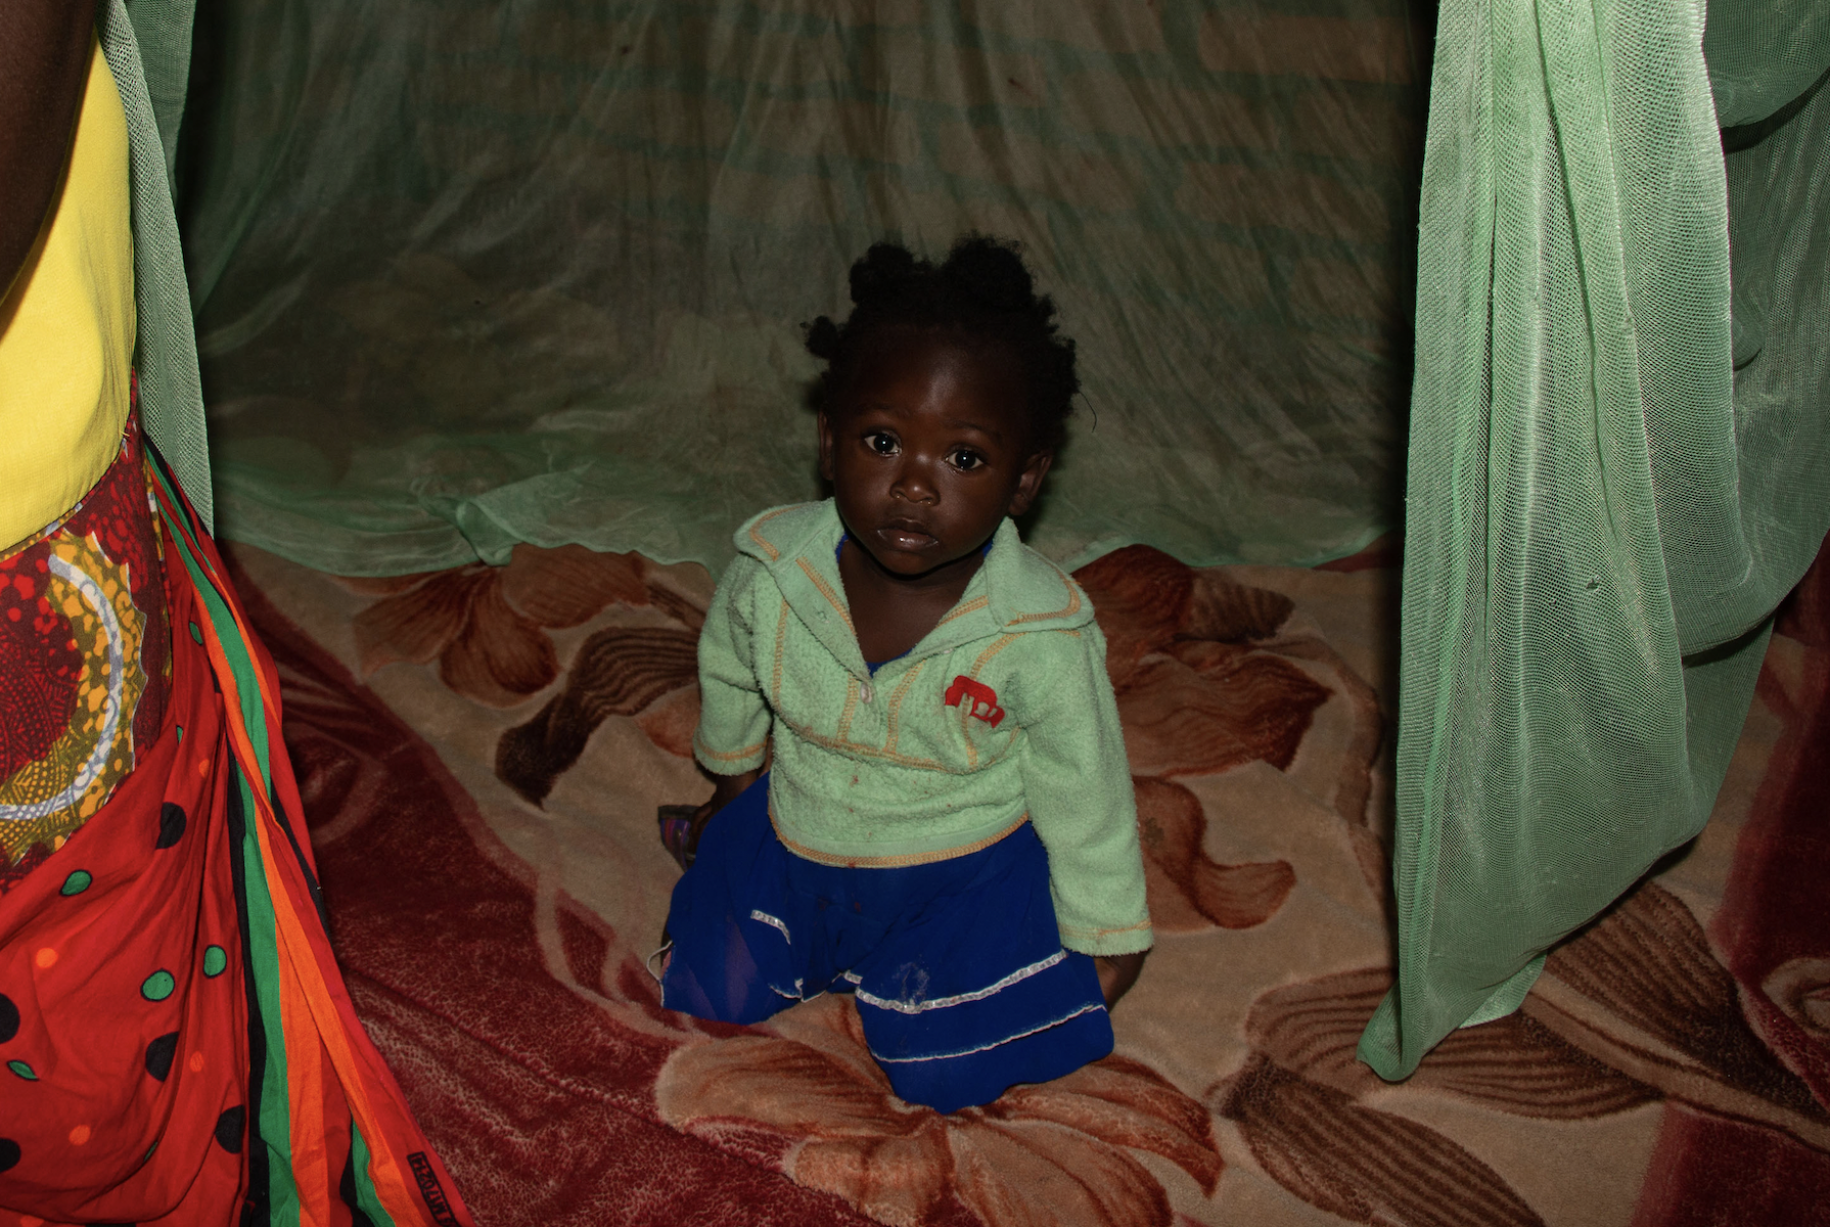 A young girl in a green sweater and shorts sits under a green mosquito net.